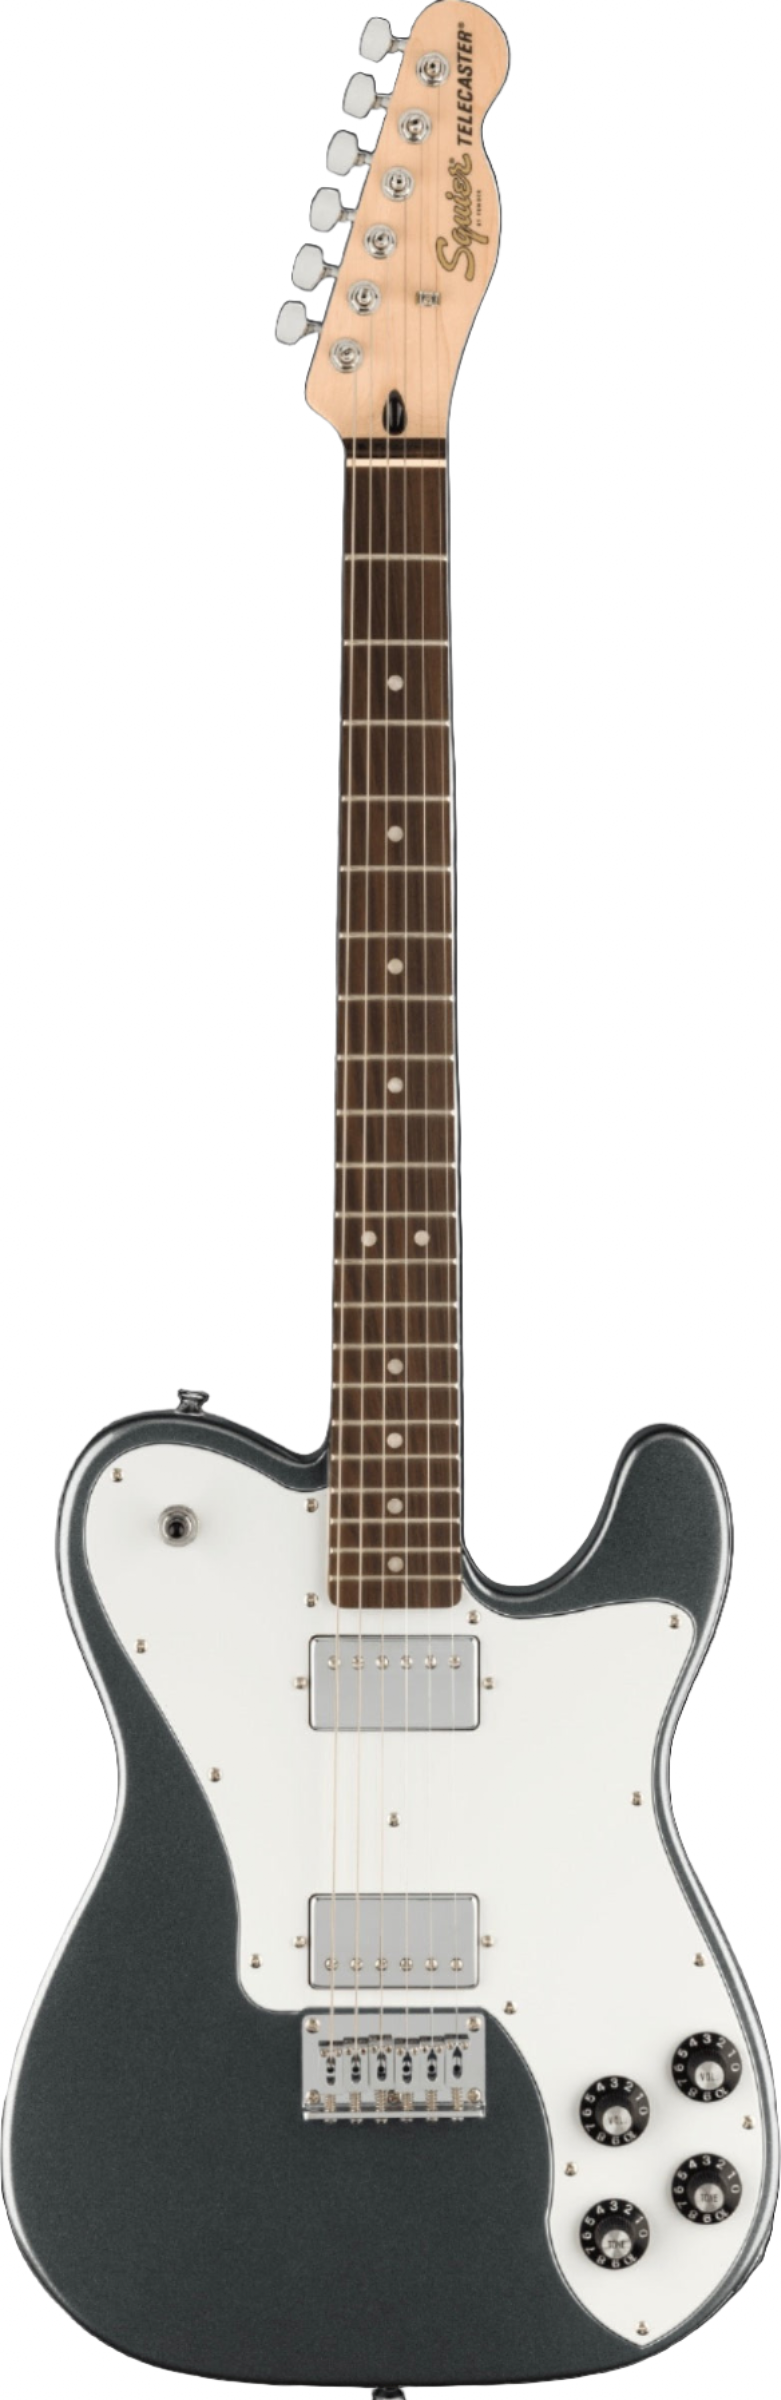 Affinity Series Telecaster Deluxe